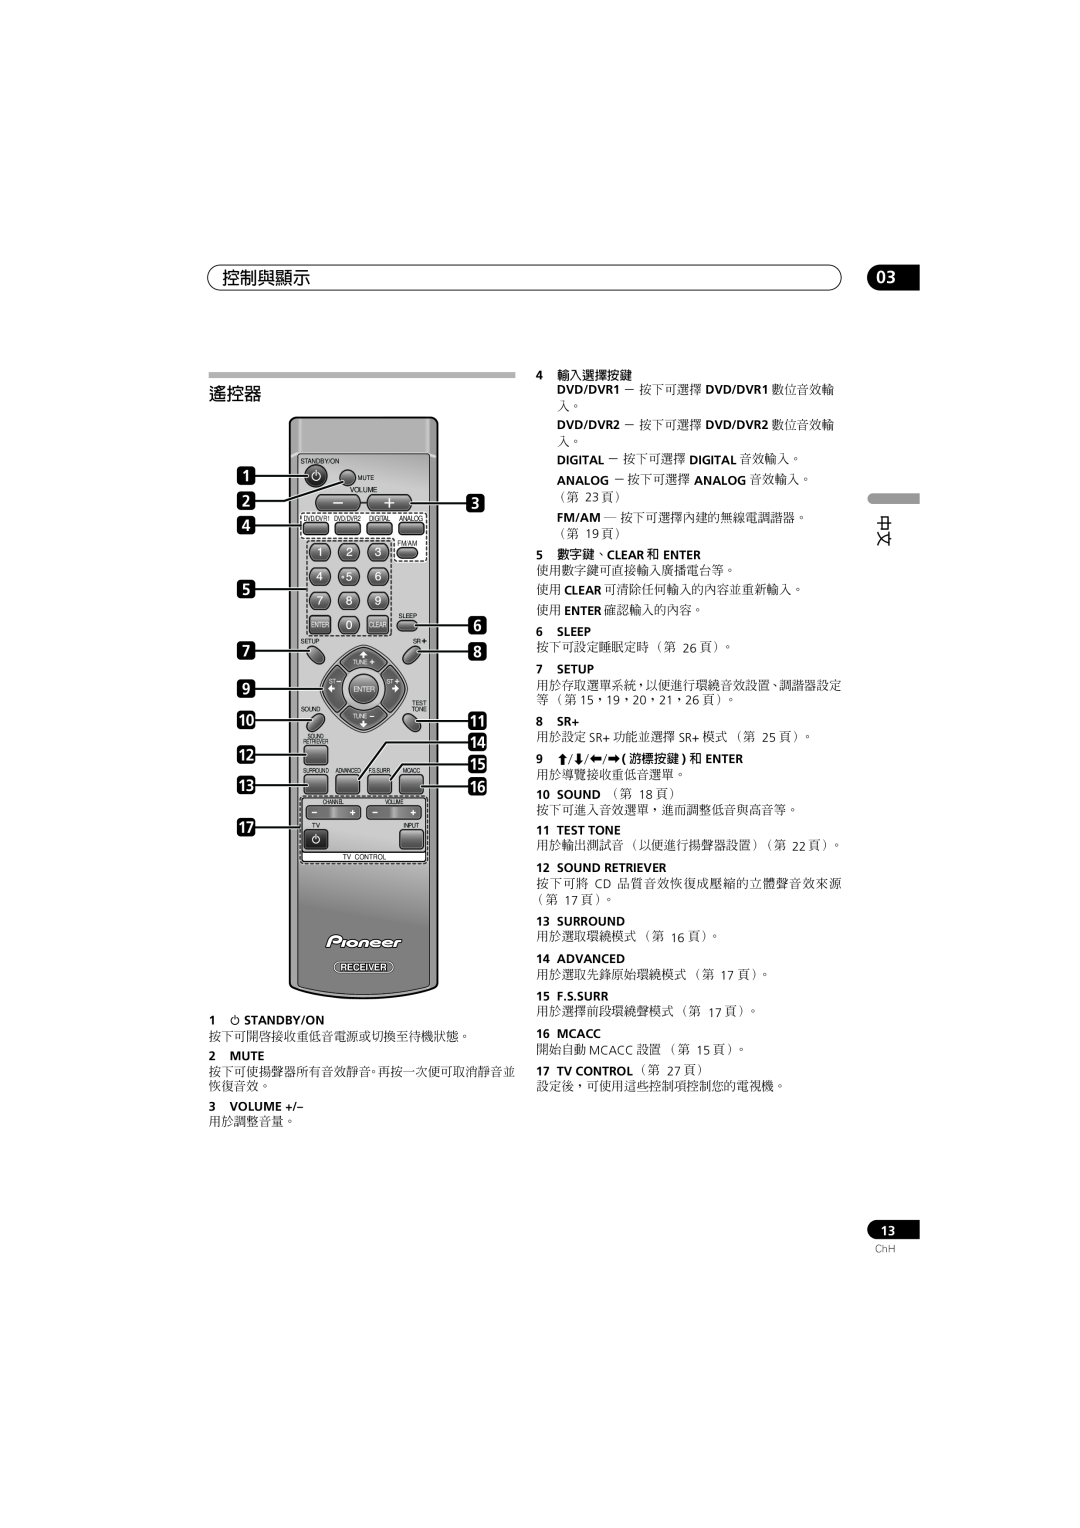 Pioneer S-ST330, SX-SW330, HTP-330 operating instructions 控制與顯示 遙控器 